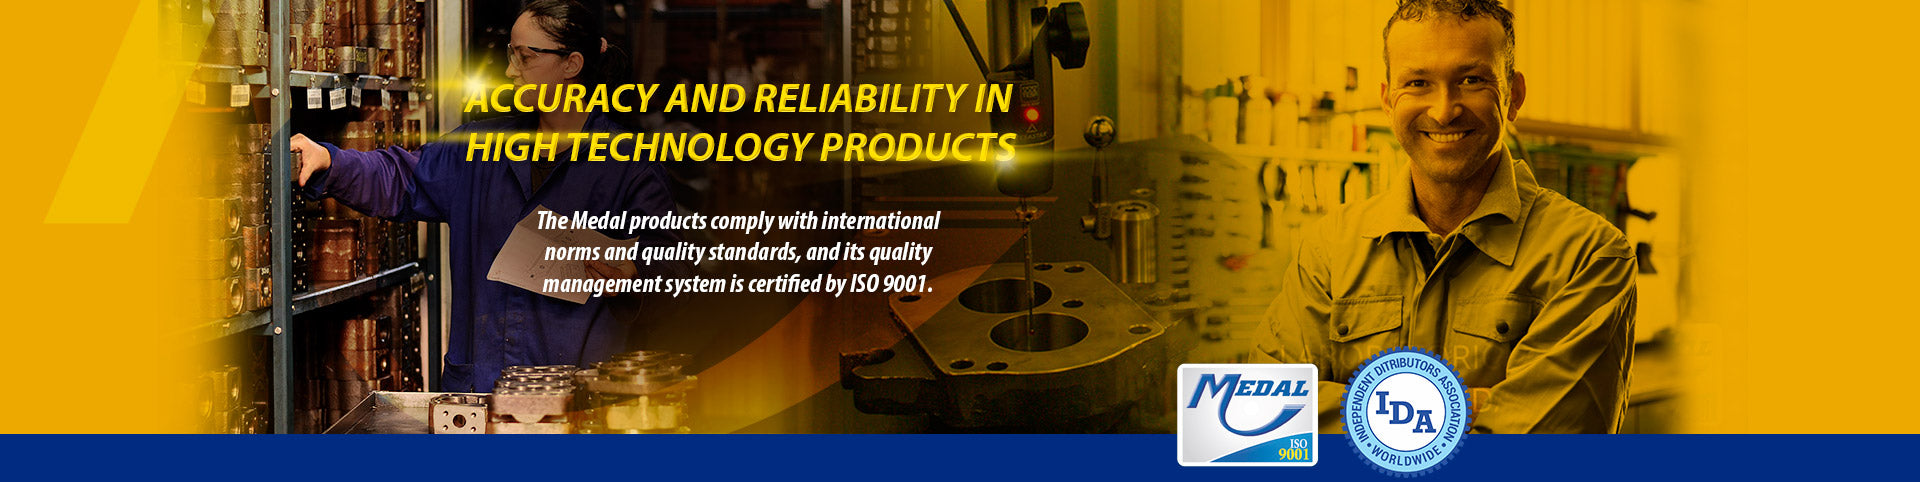 Accuracy and reliability in high technology products